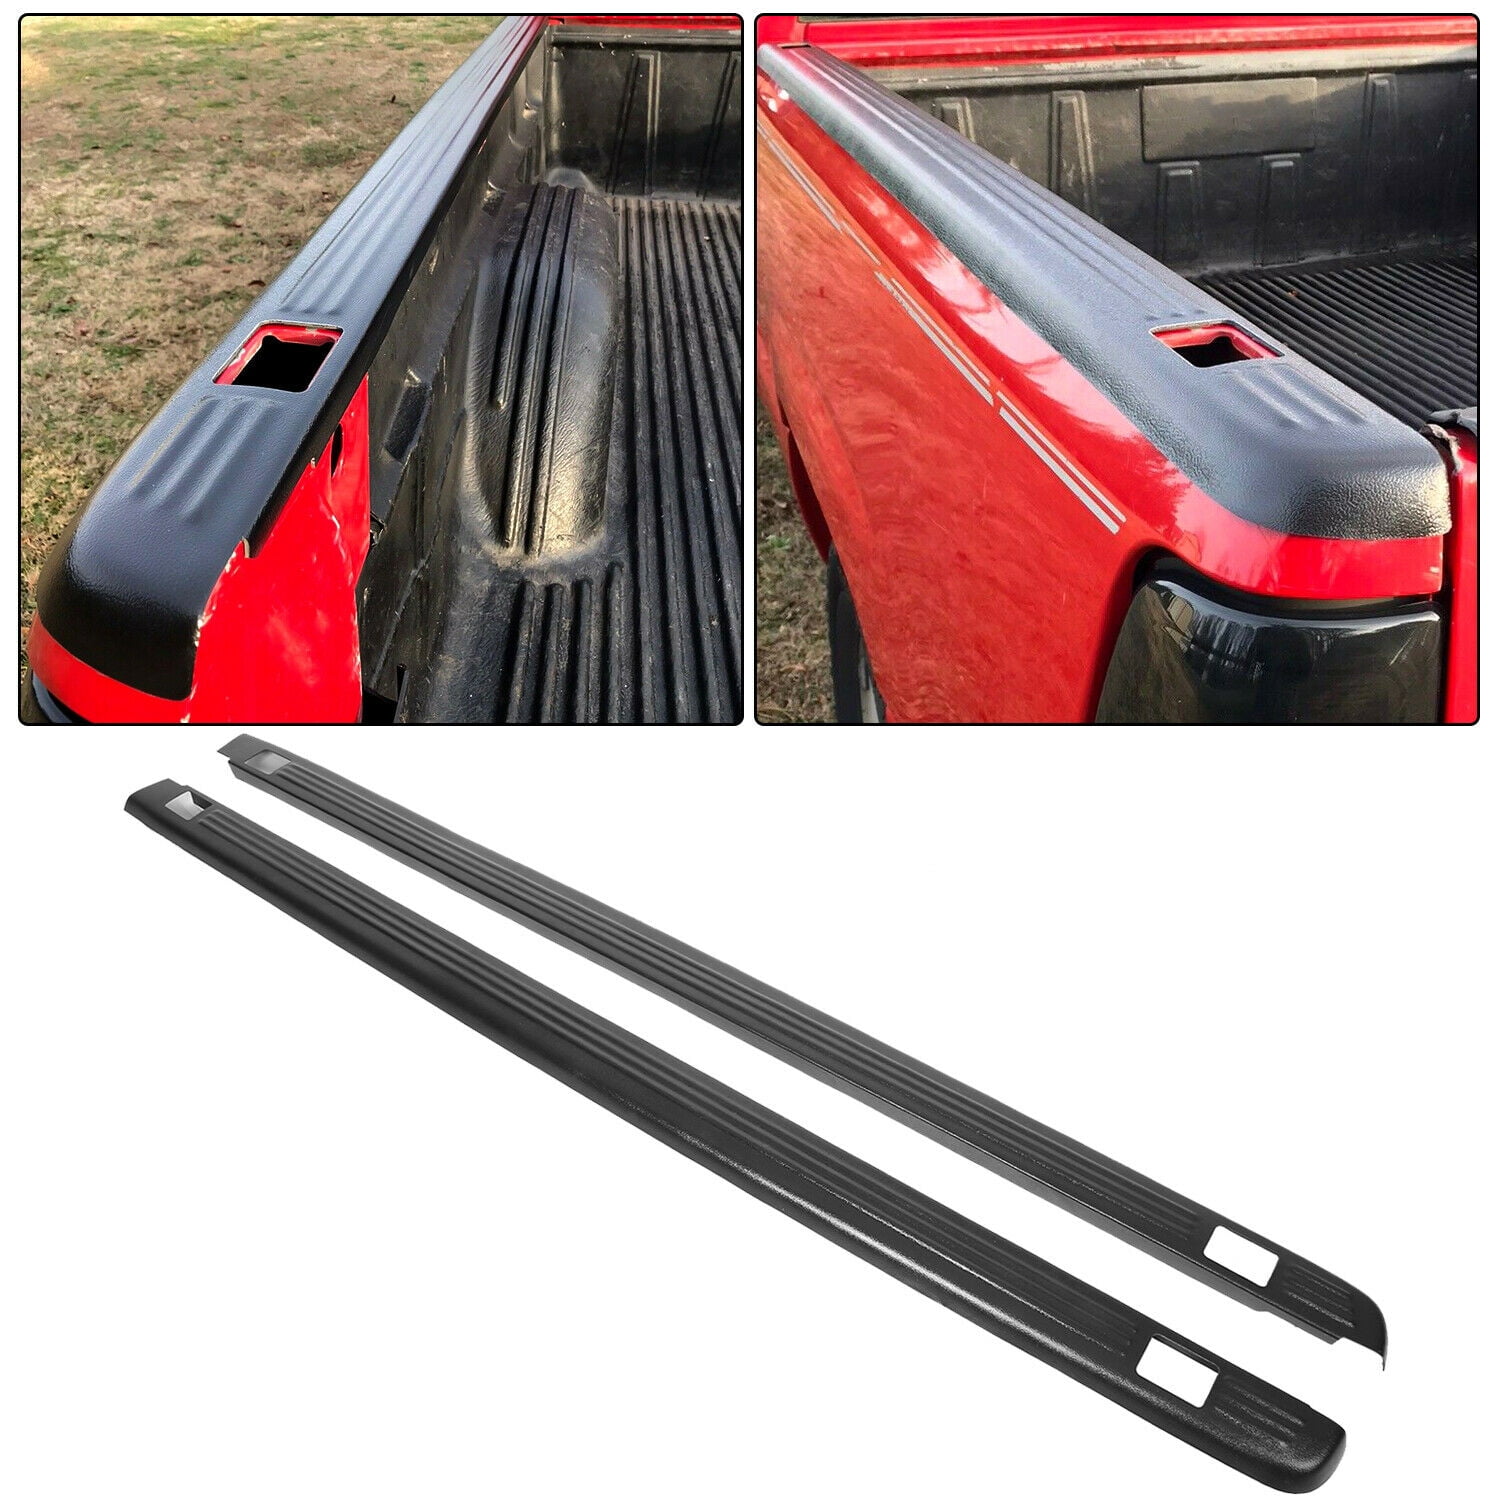 Wade 72-01104 Truck Bed Rail Caps Black Ribbed Finish with Stake Holes for 2007-2014 Chevrolet Silverado 1500 2500 with 6.5ft bed Set of 2 